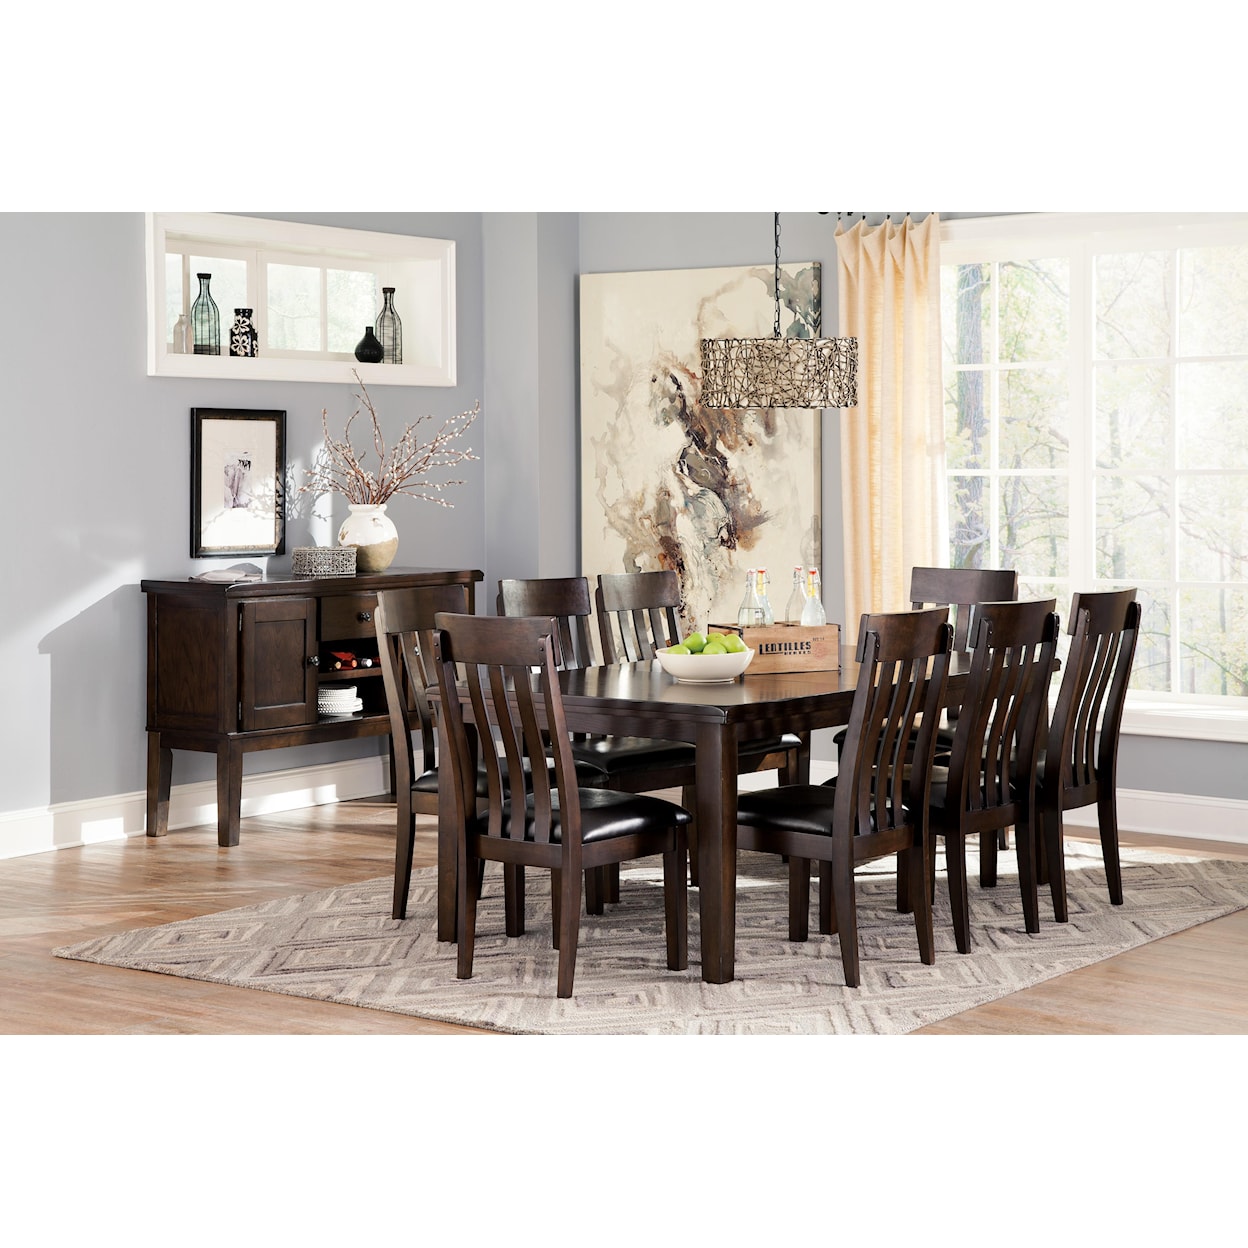 Ashley Furniture Signature Design Haddigan Dining Upholstered Side Chair